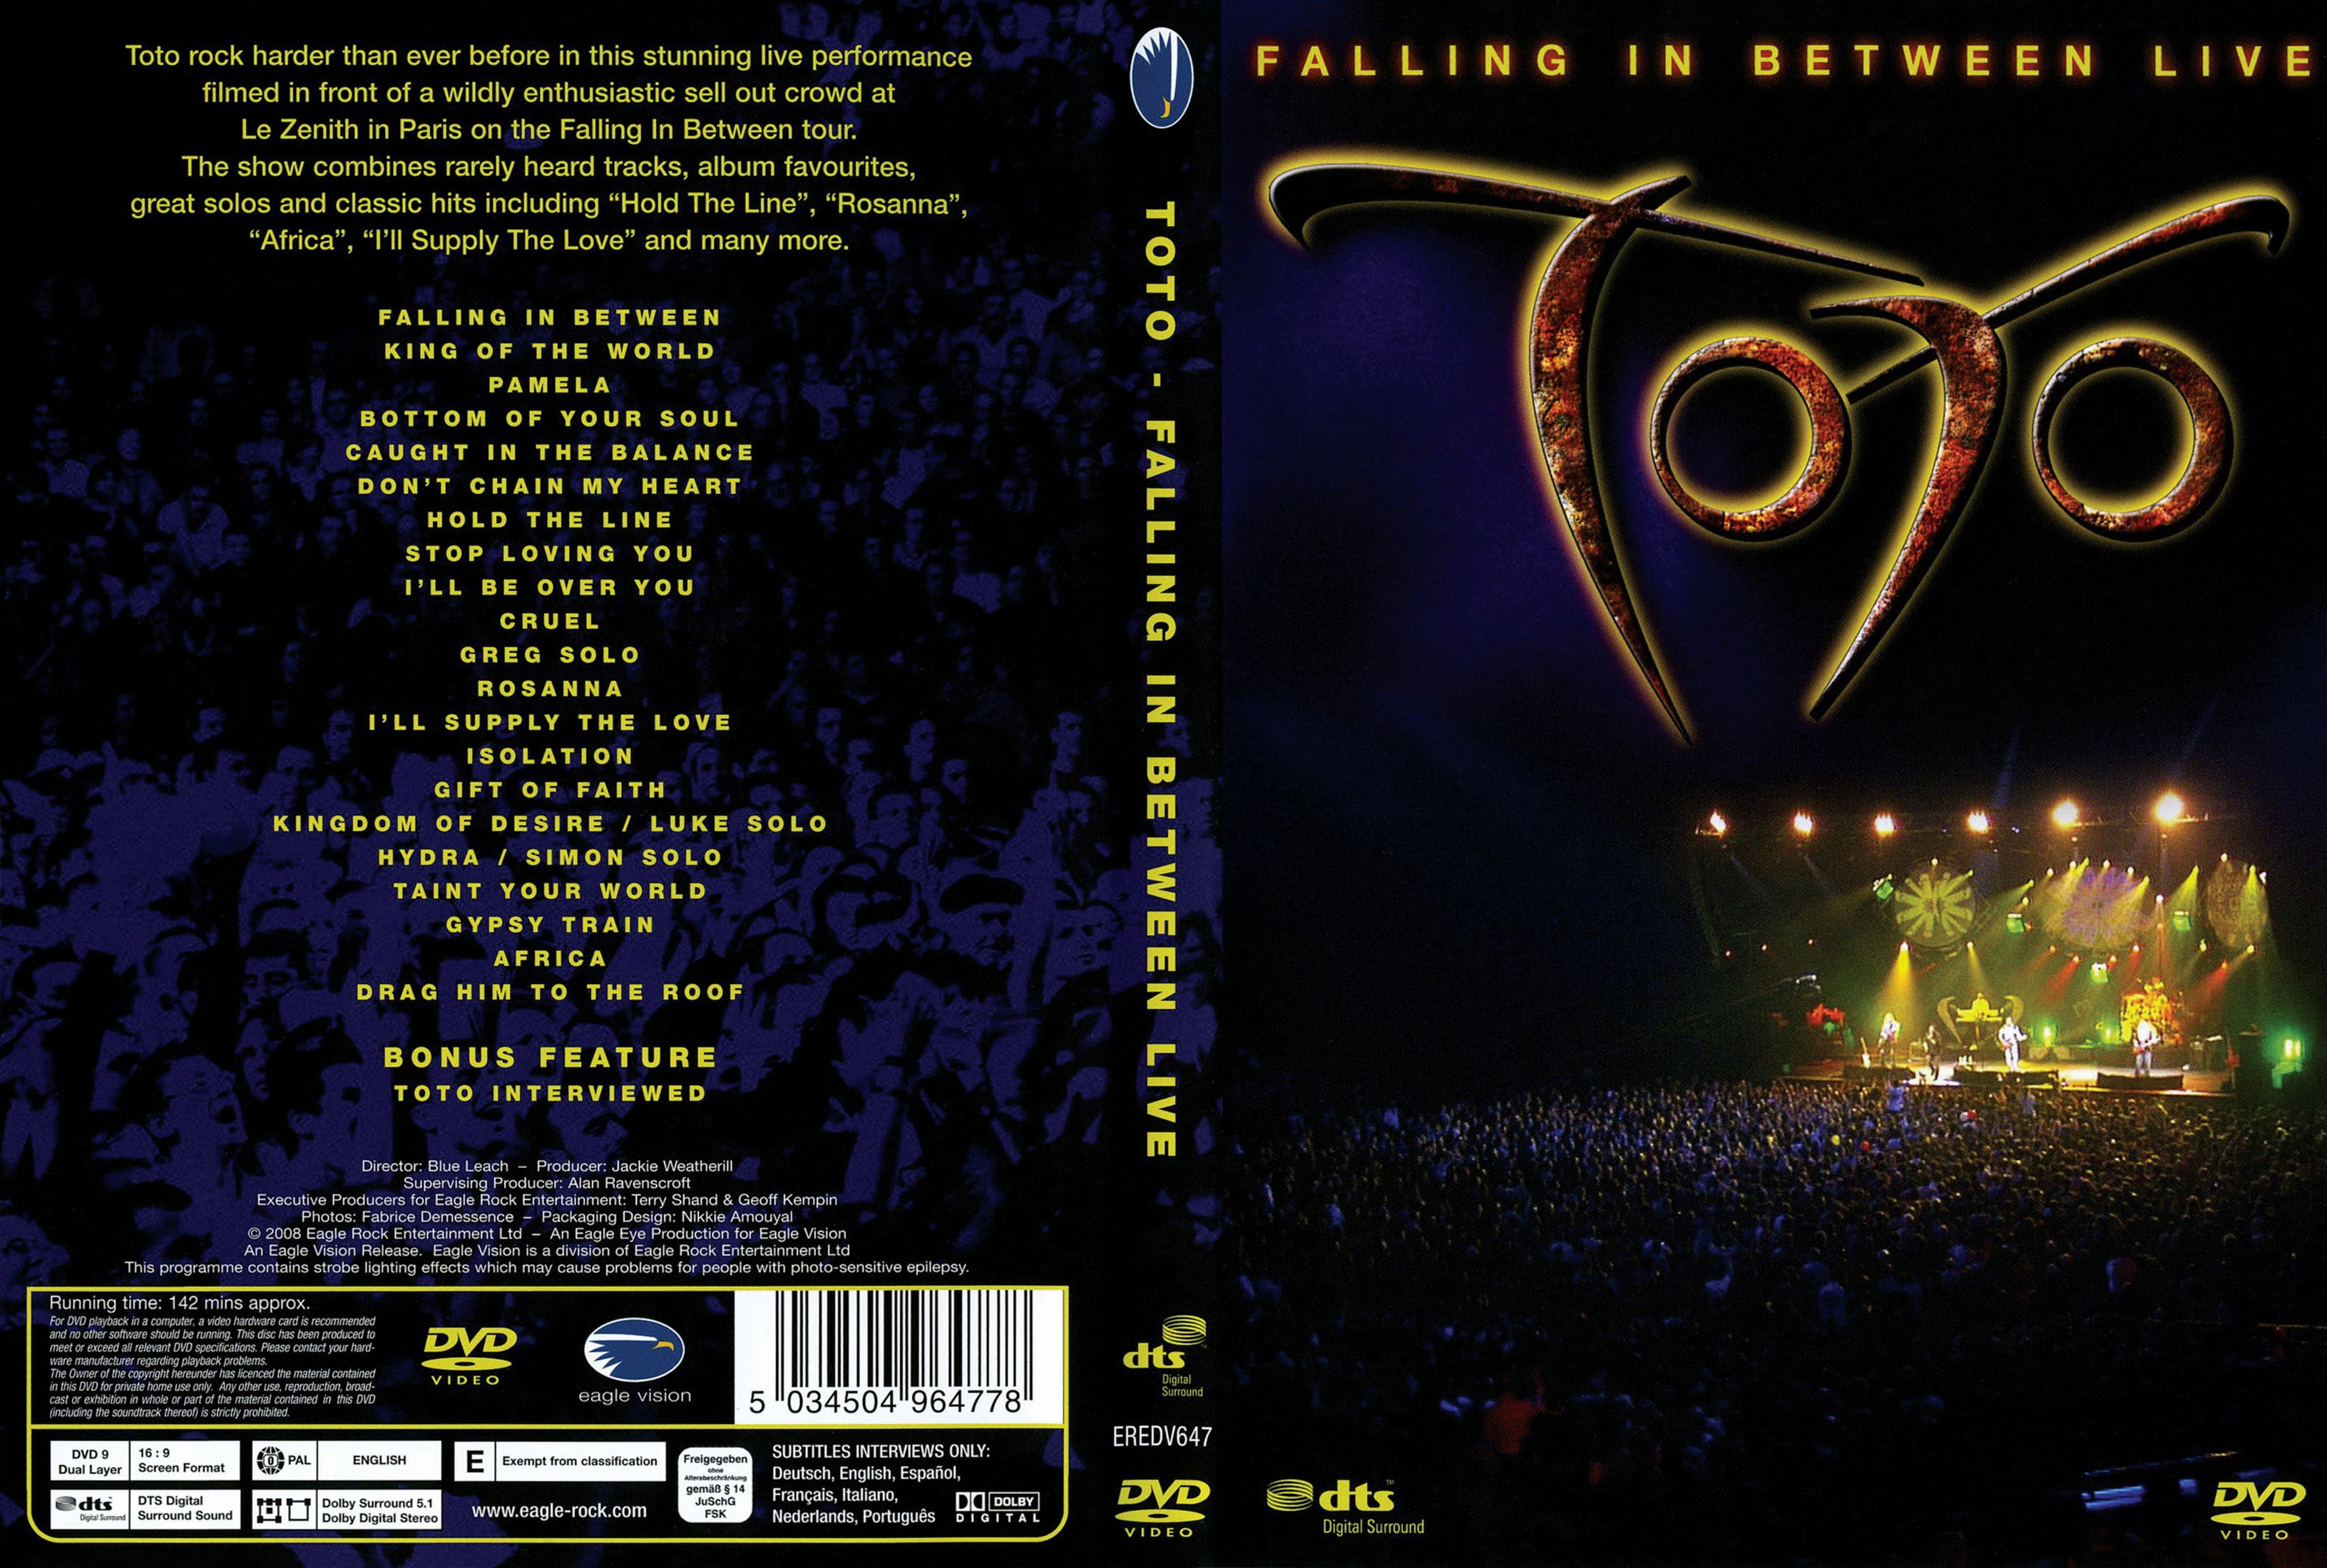 Jaquette DVD Toto Falling in between live